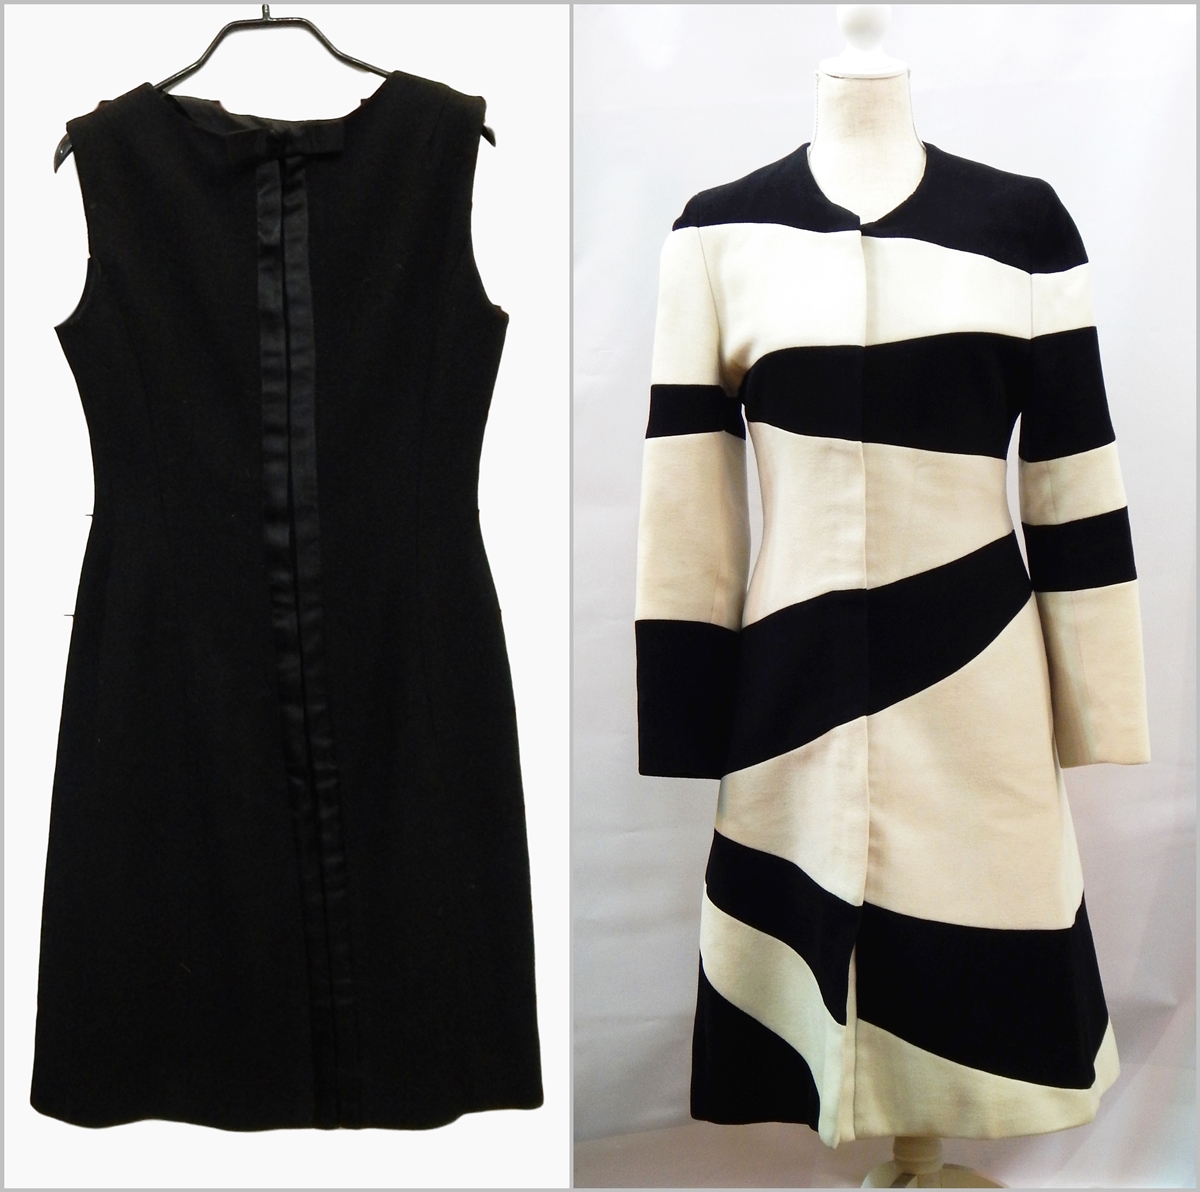 A 1960's style black wool shift cocktail dress with a Jasper Conran black and white striped wool